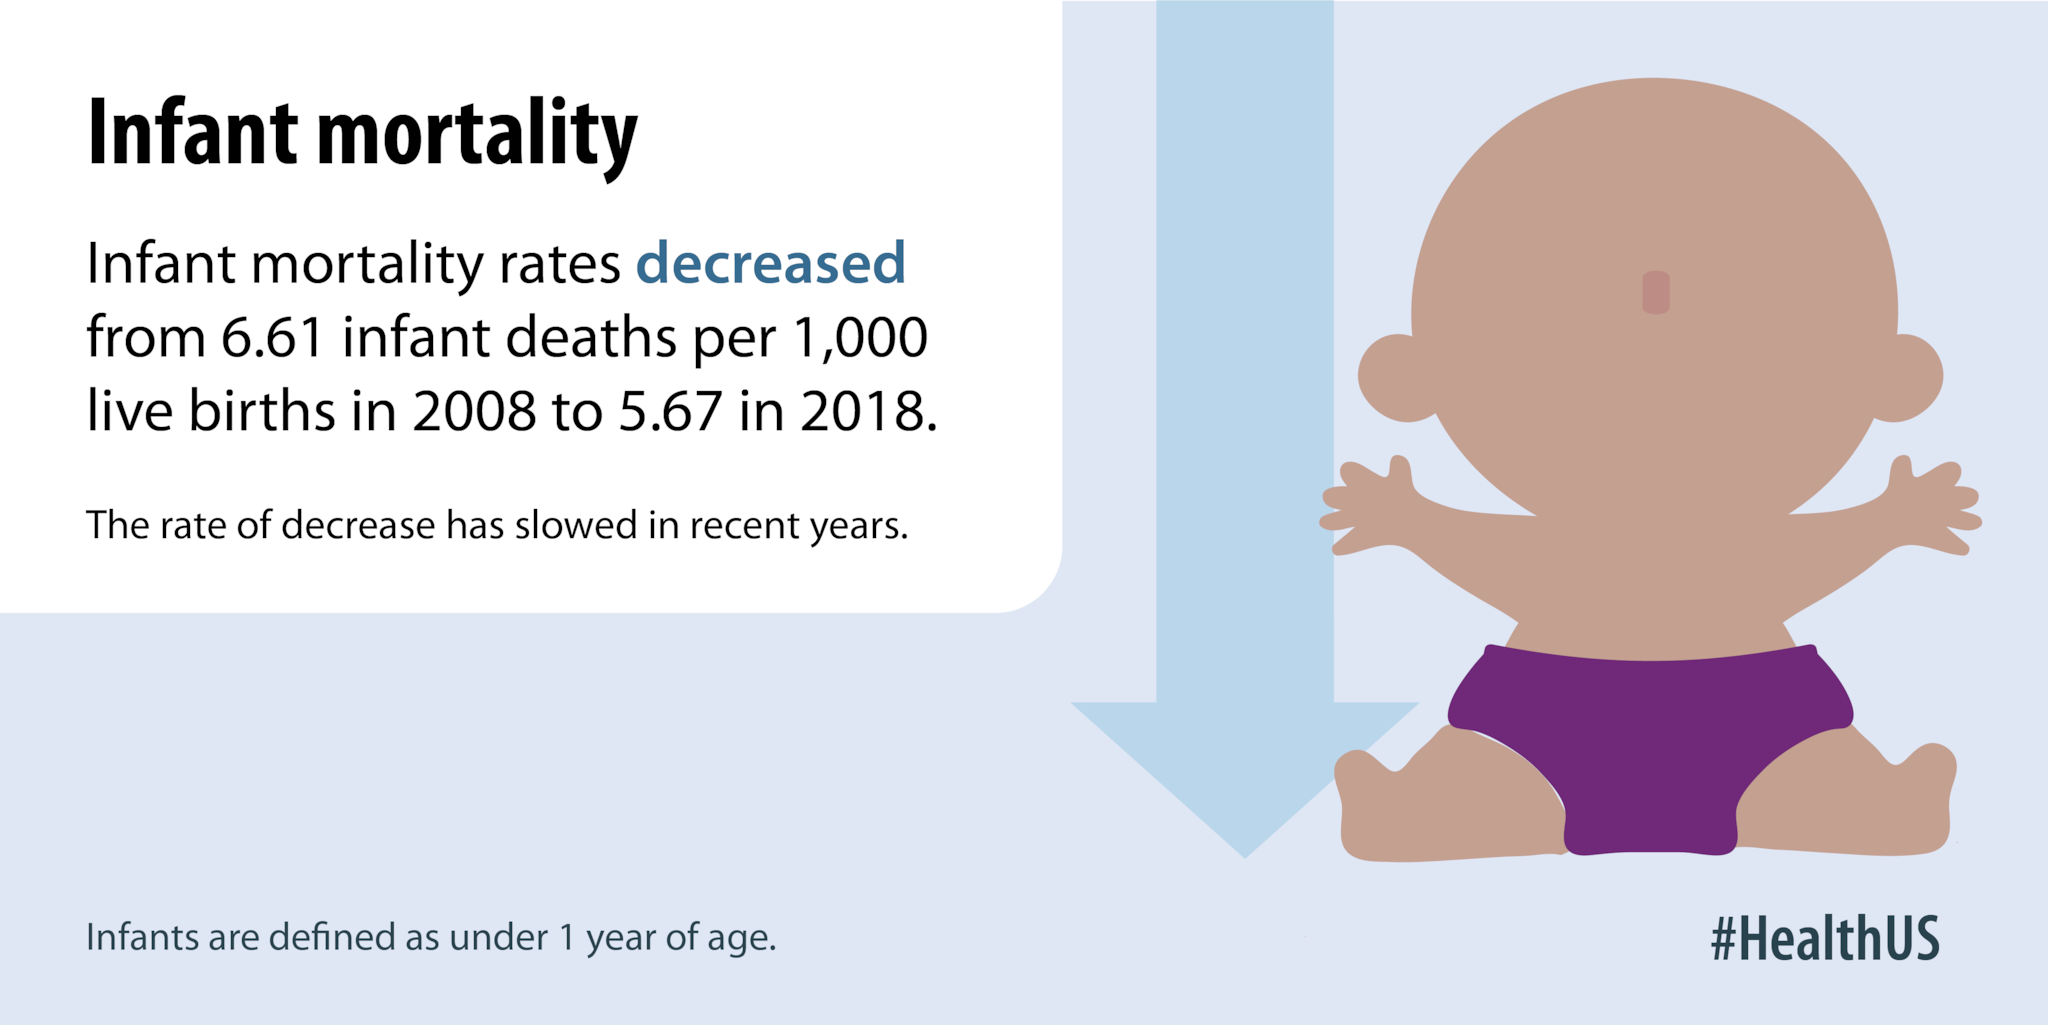 Infant mortality rates decreased from 6.61 infant deaths per 1,000 live births in 2008 to 5.67 in 2018.